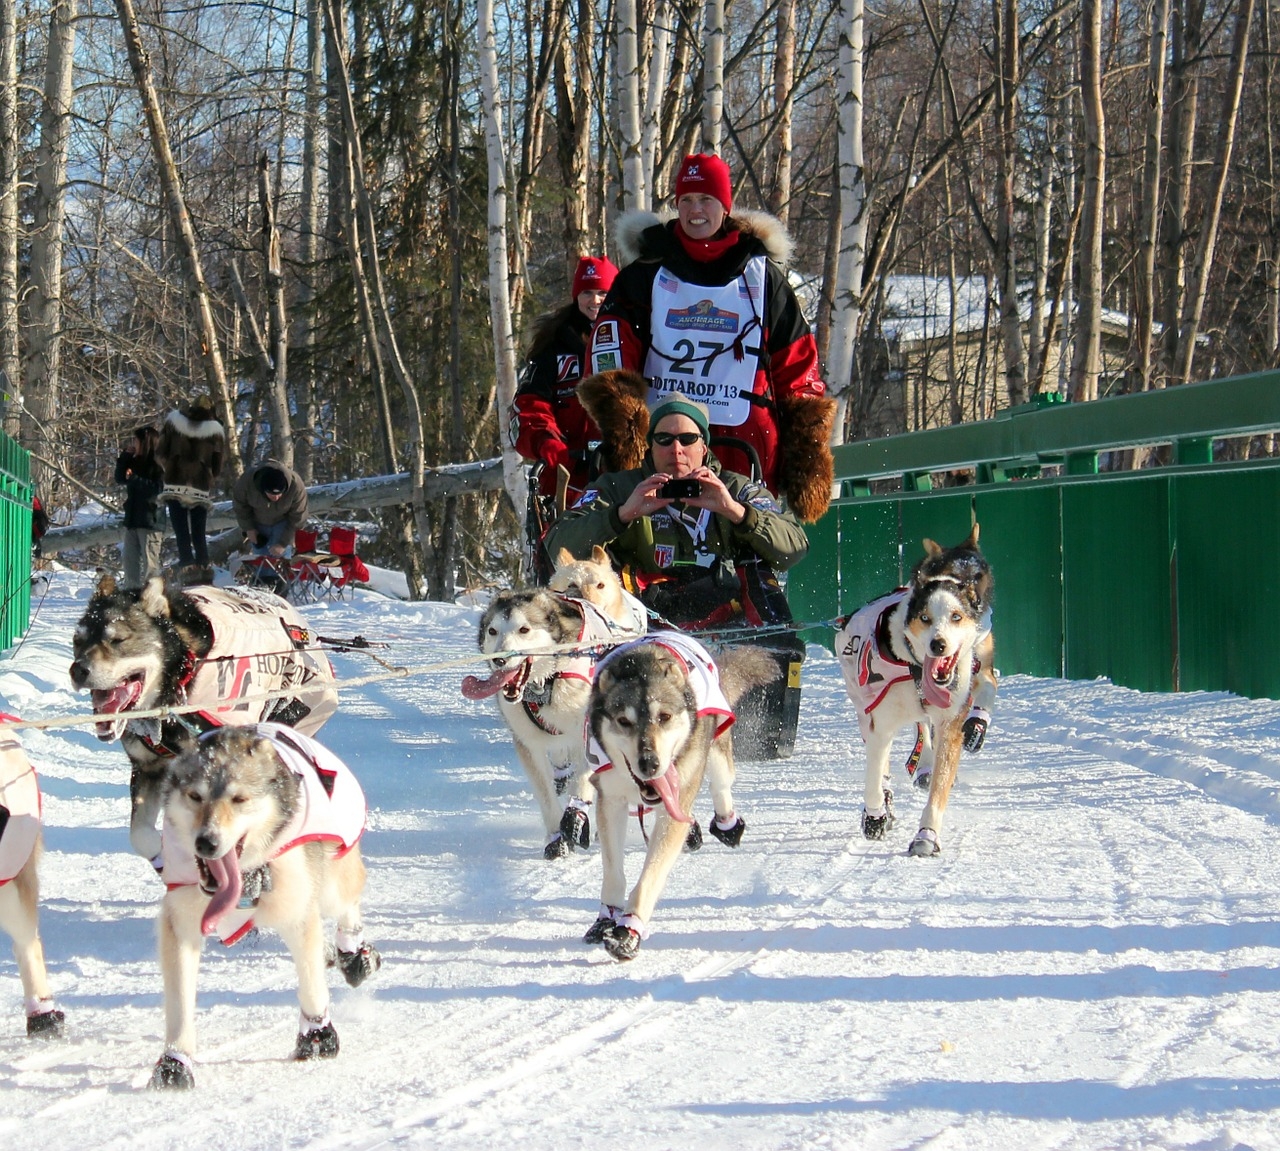 Iditarod sled dog race is engulfed in dog-doping scandal